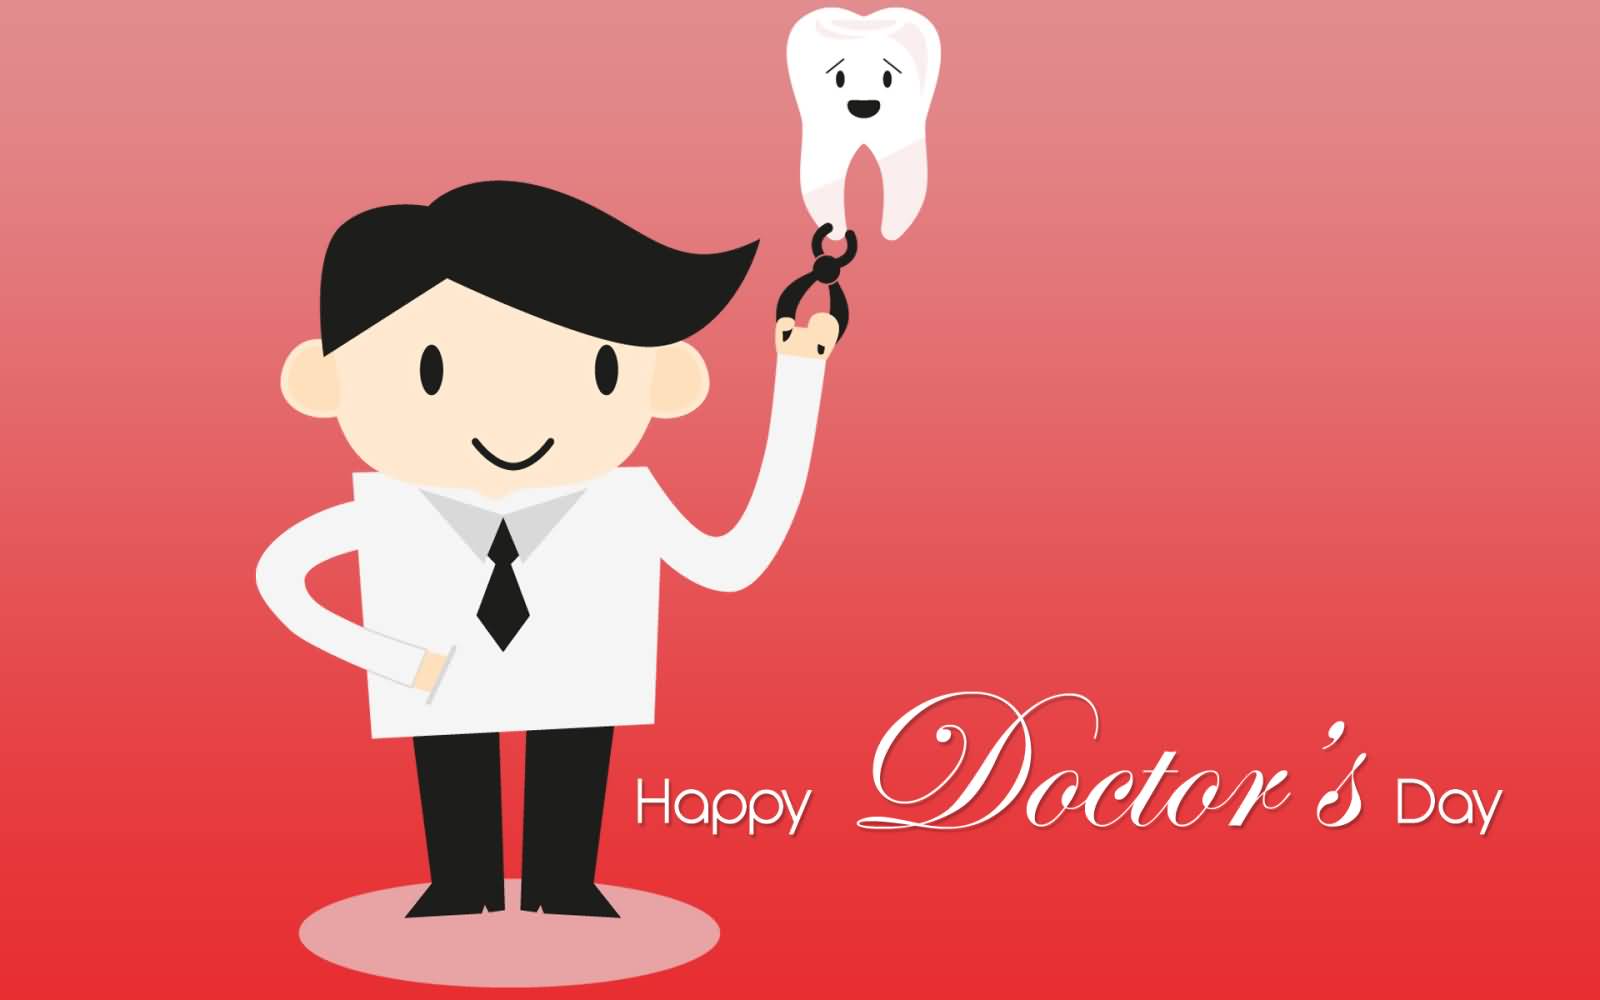 Happy Doctor’s Day Greeting Card